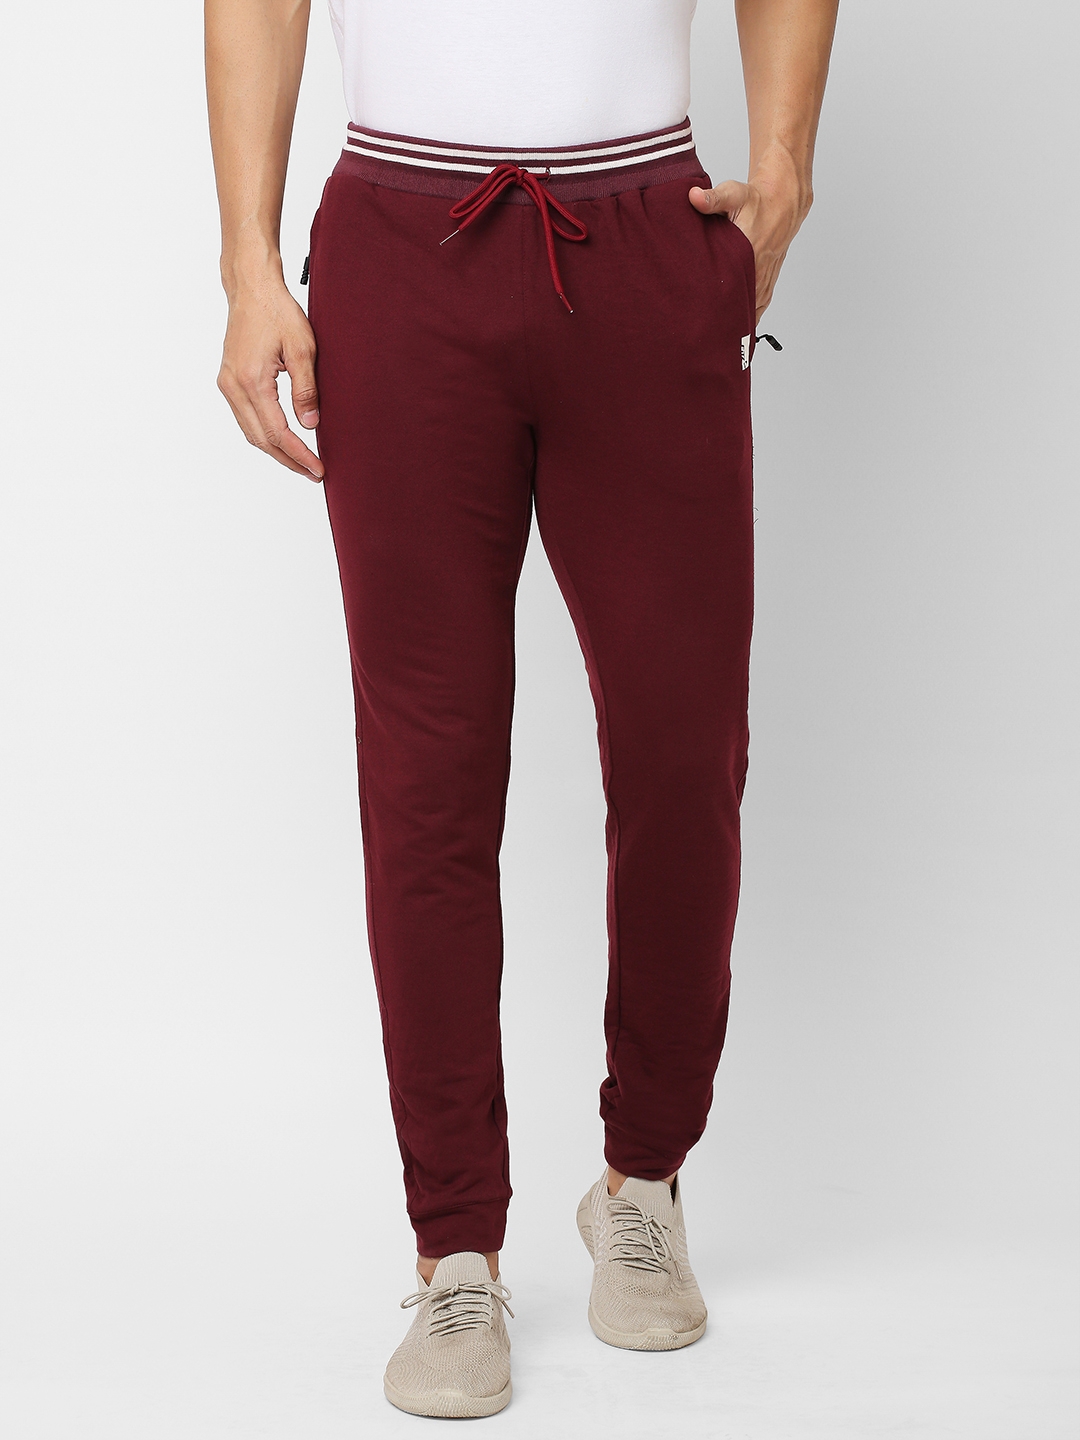 FITZ | Men's Slim Fit Red Cotton Blend Casual Joogers